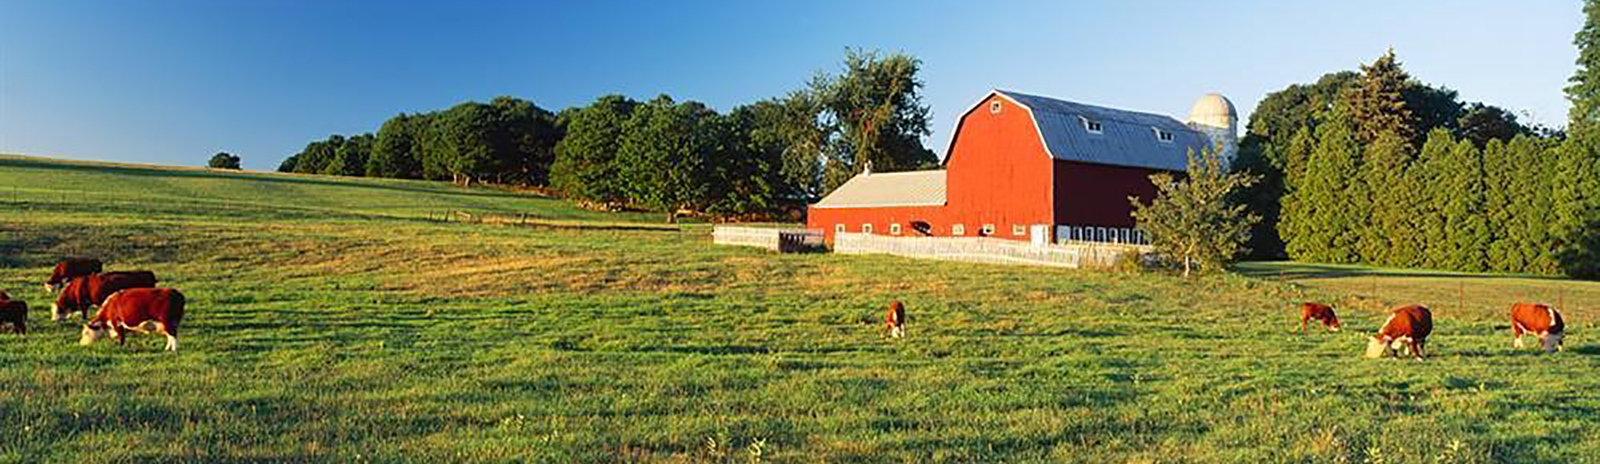 image of a barn and cows grazing in a field